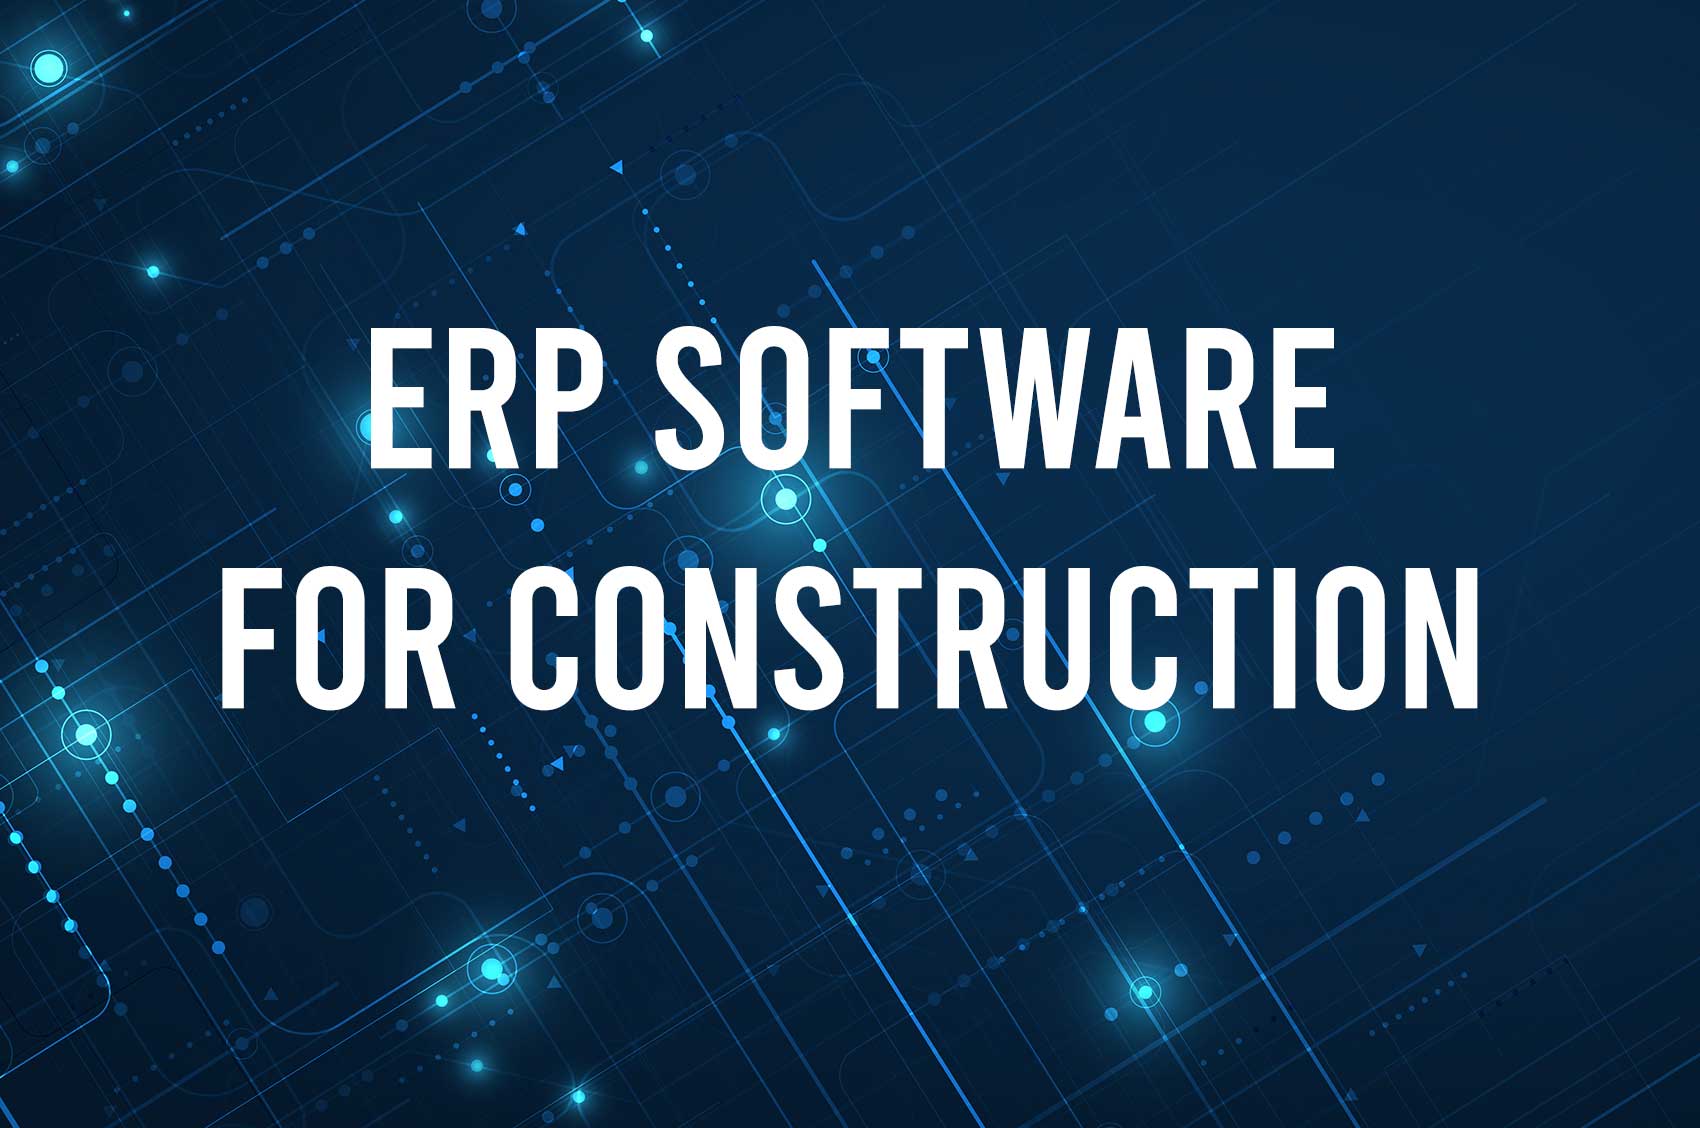 Moving towards a digital future with ER software